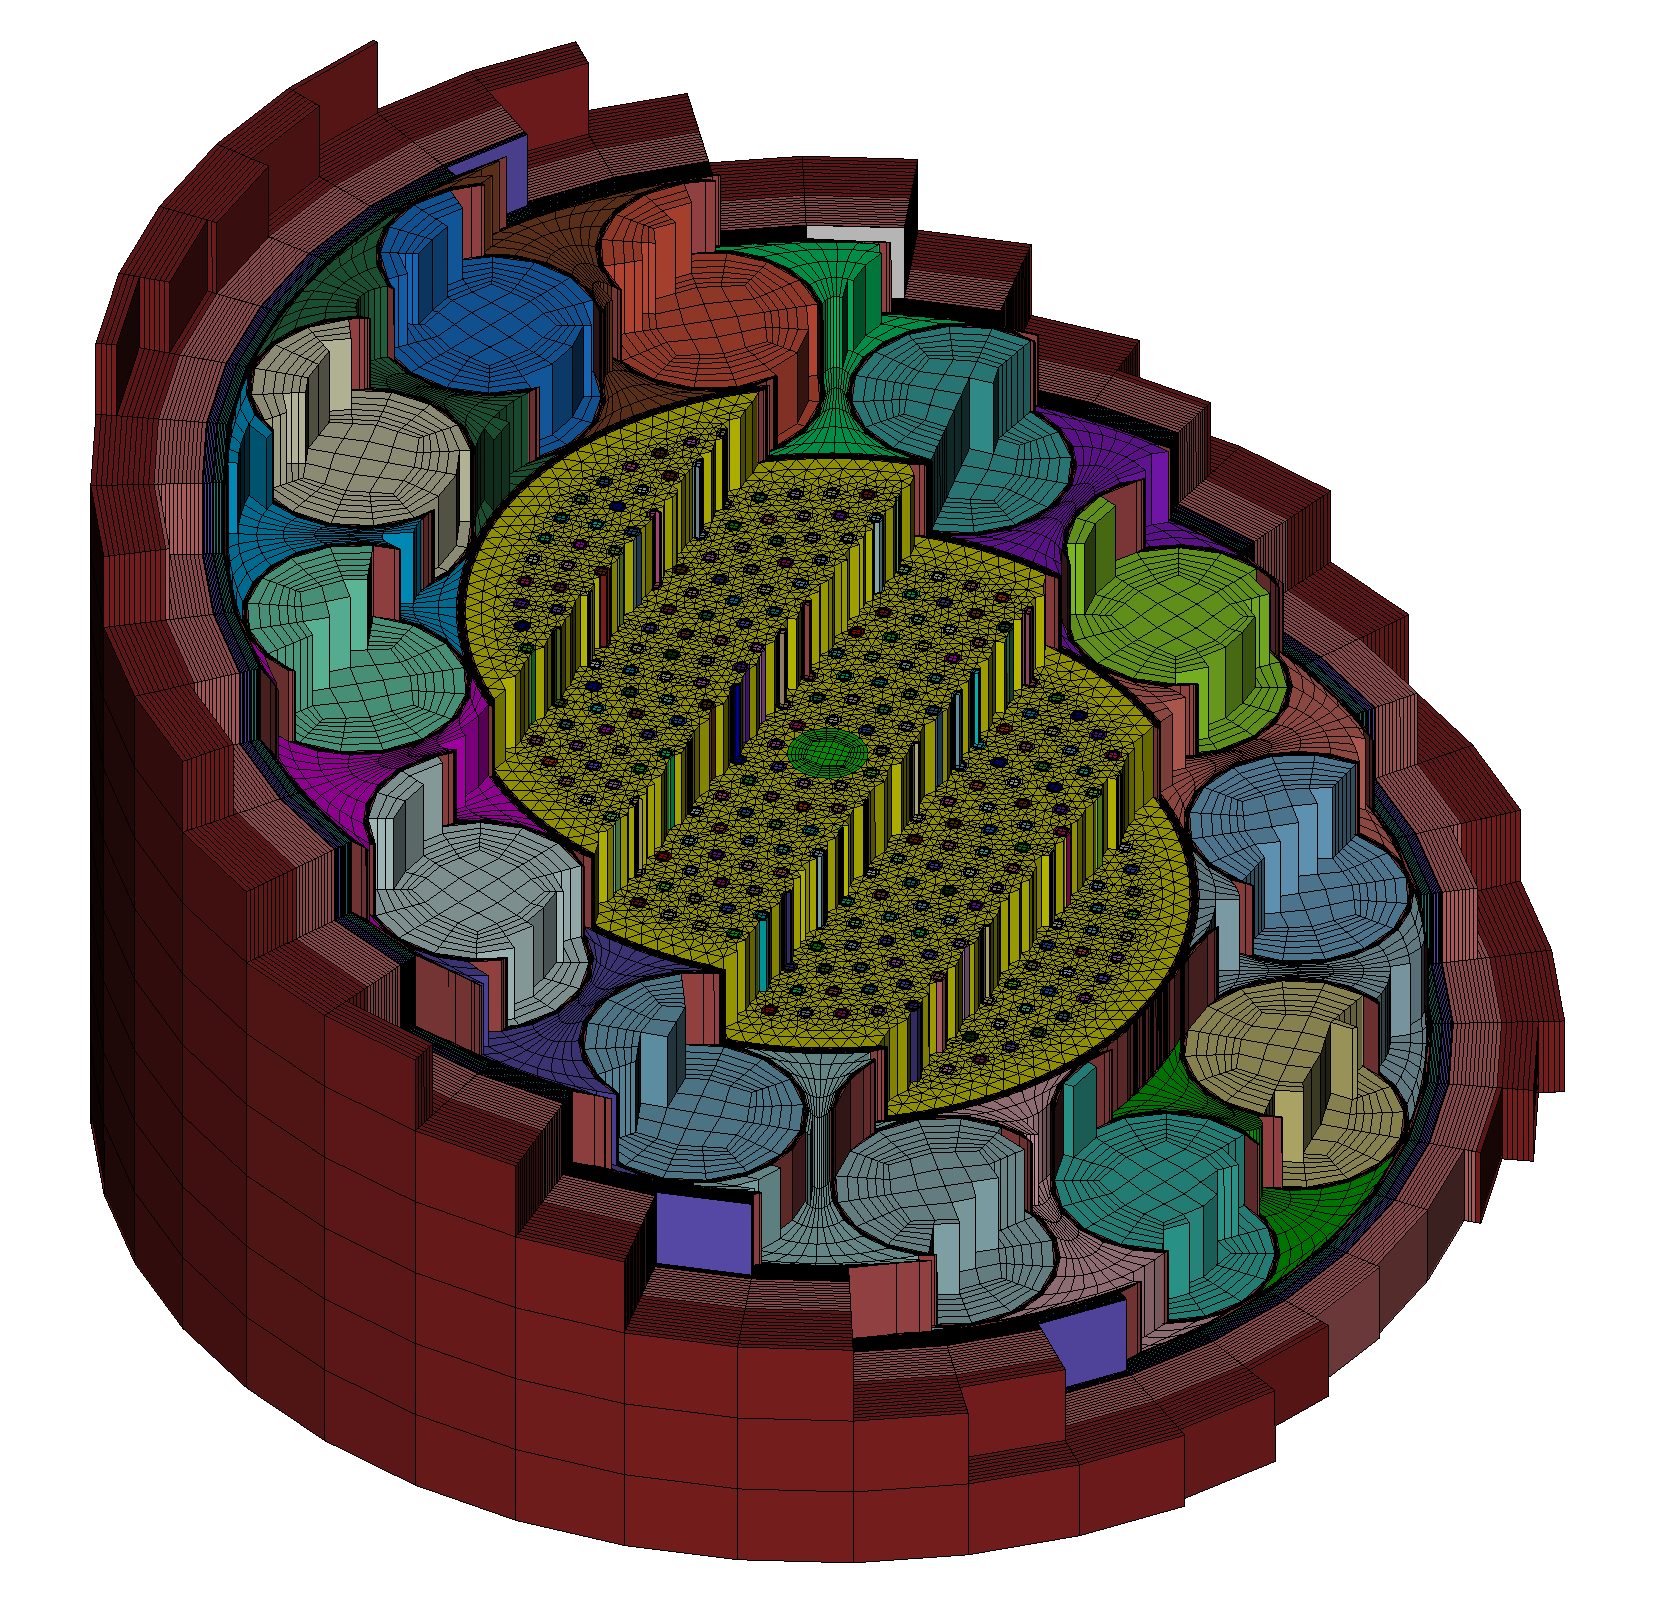 Figure 3. An imported CAD model meshed with the Coreform Cubit Python API. For the highest-fidelity models, Radiant employs a 3rd party CAD tool whose geometry is then imported into Coreform Cubit as a STEP file, then webcut and meshed with both hexes and tets entirely through the Python API. In this way, more complicated geometries can be ingested for simulation.